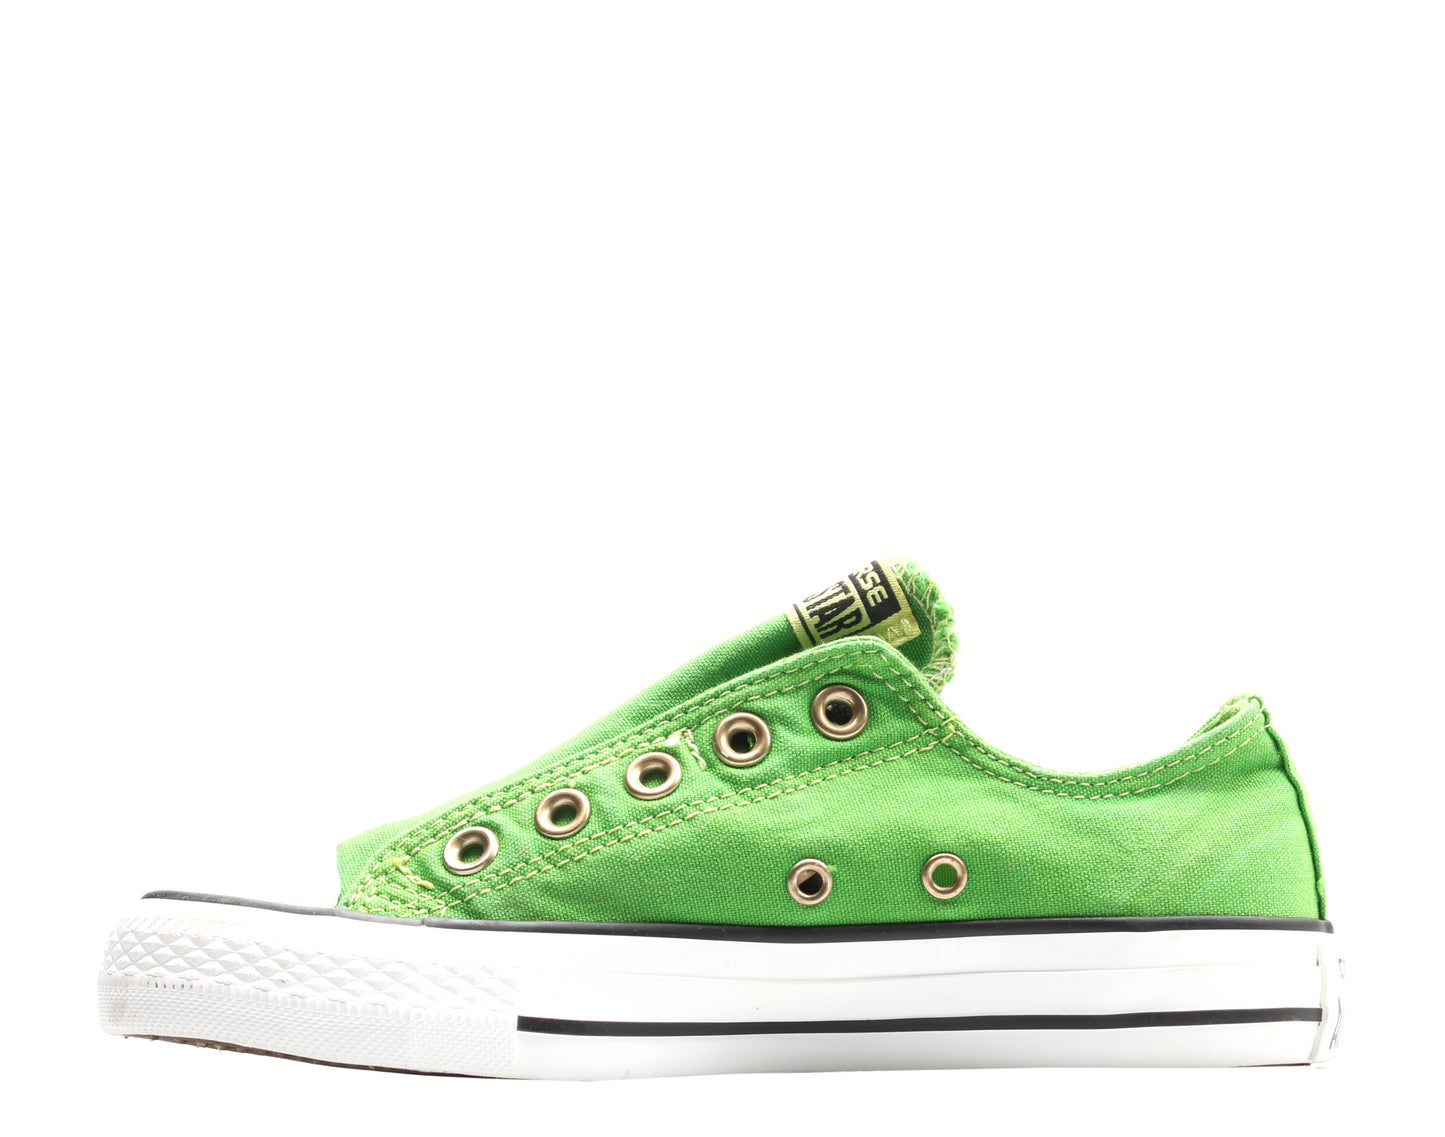 Converse Chuck Taylor All Star Slip-On Jungle Green Low Top Sneaker 142347C